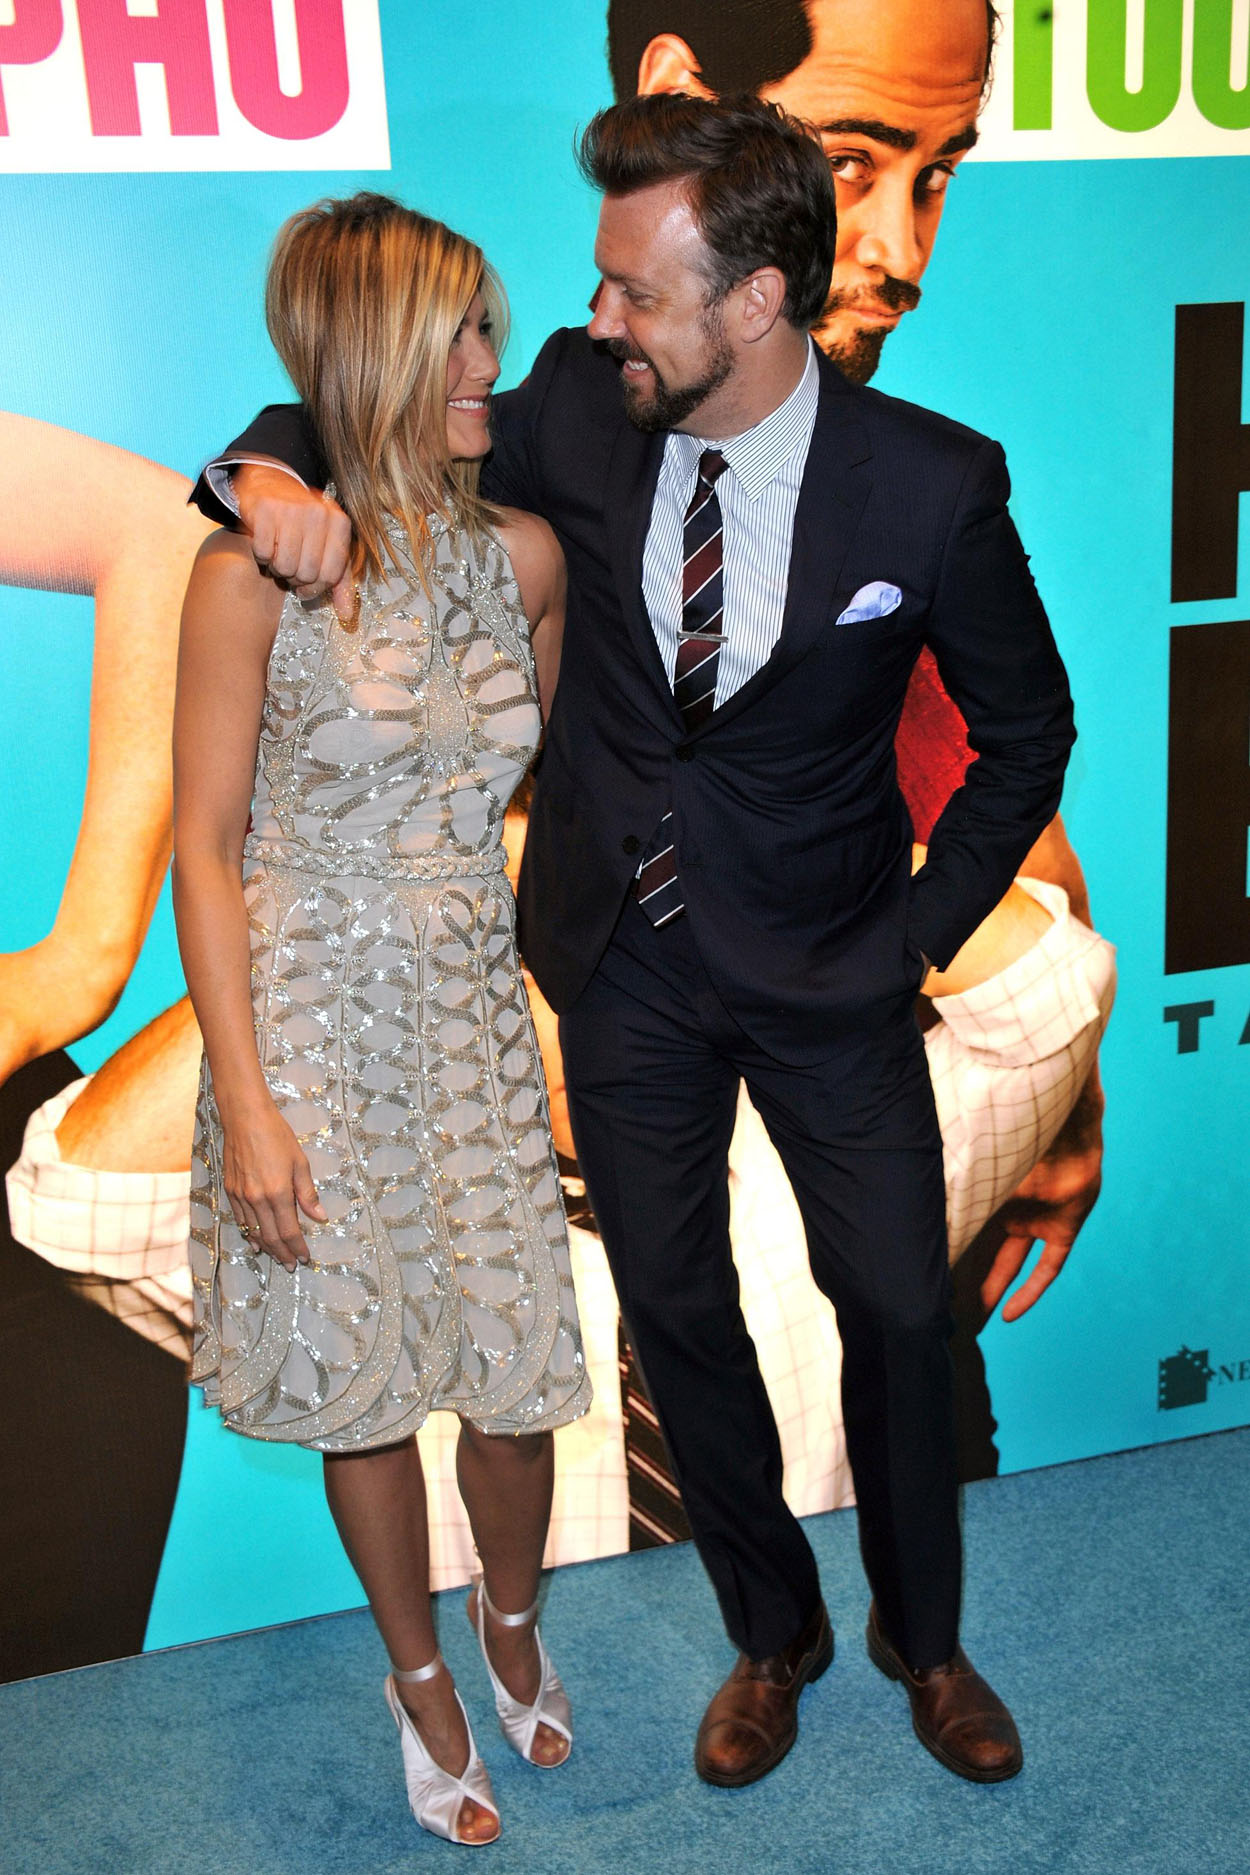 Jennifer Aniston, Jason Sudeikis attend the UK premiere of the movie Horrible Bosses at BFI Southbank on 20th July 2011